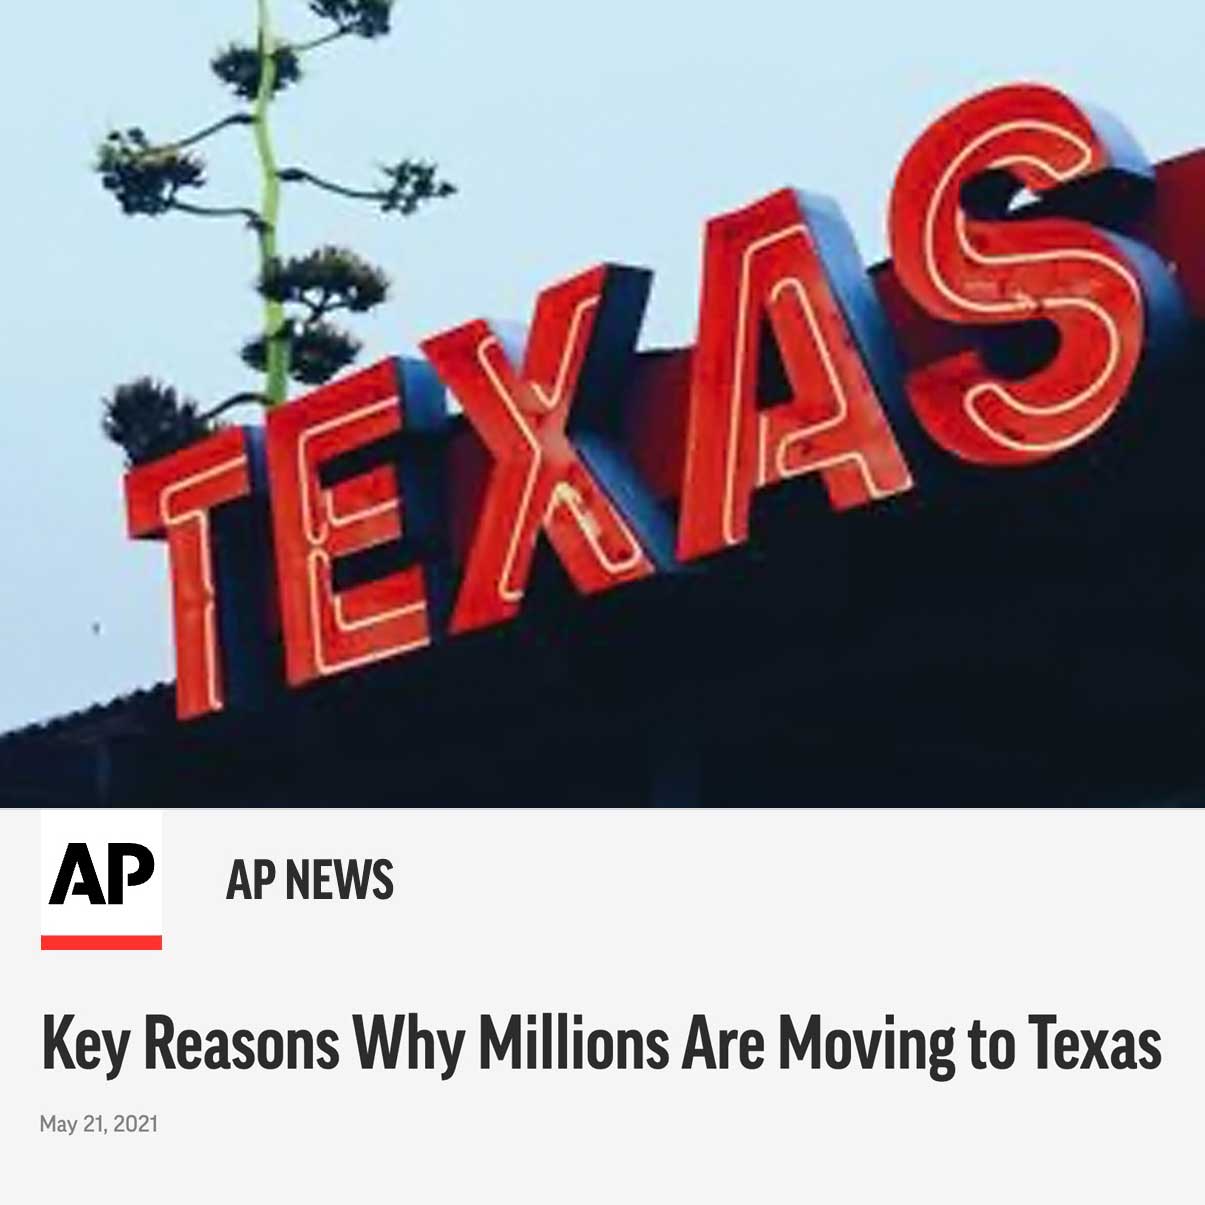 Key reasons why millions are moving to Texas